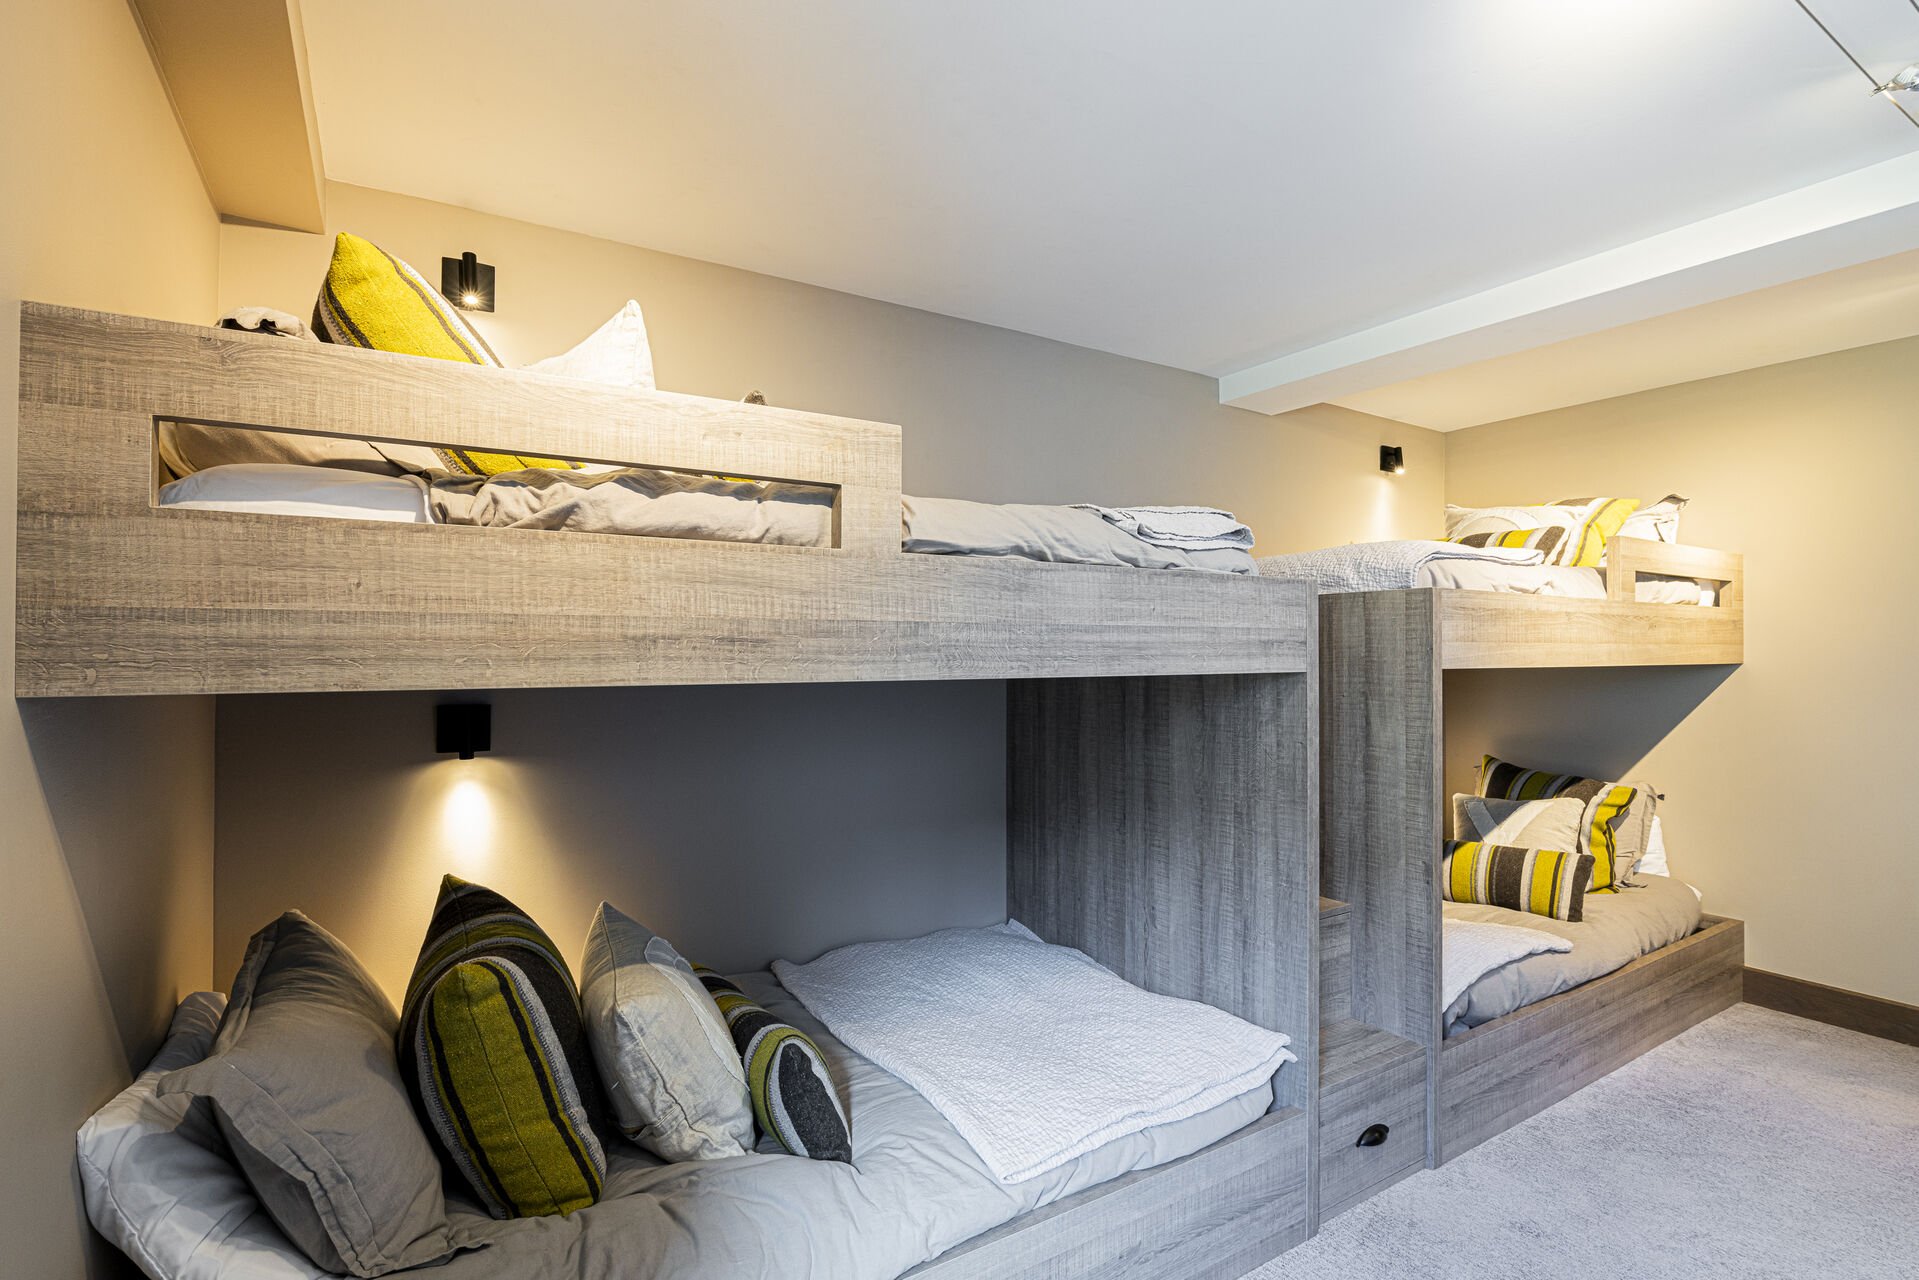 Bunk Beds - Each with Their Own Reading Lights